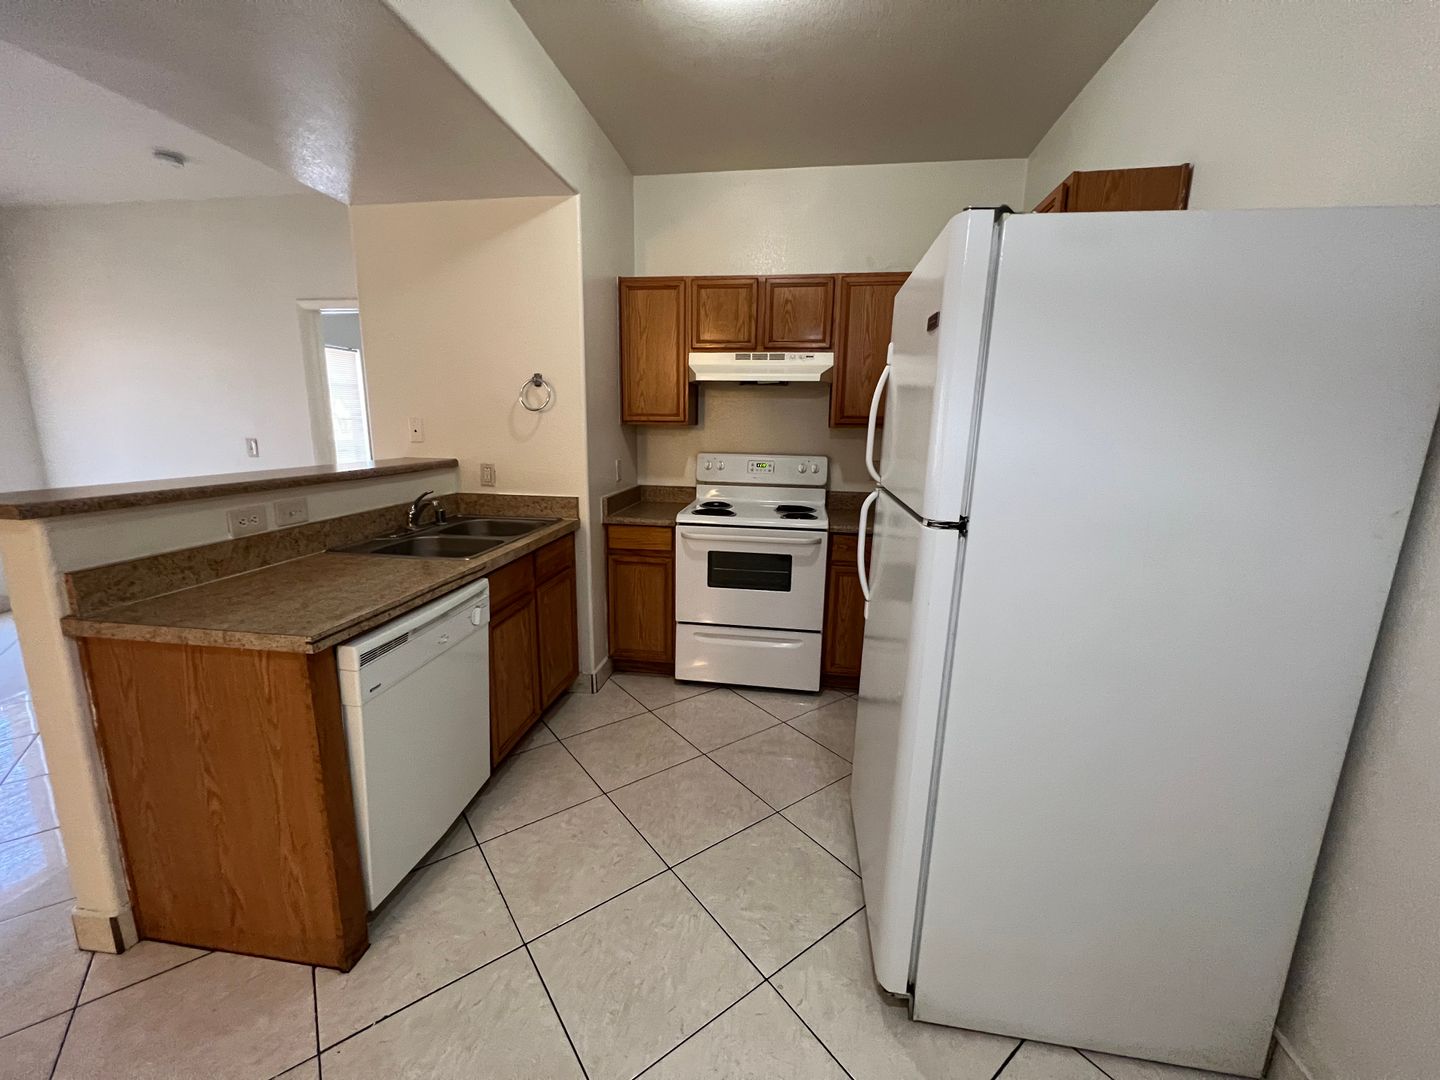 GREAT TWO BEDROOM, TWO BATH UNIT!